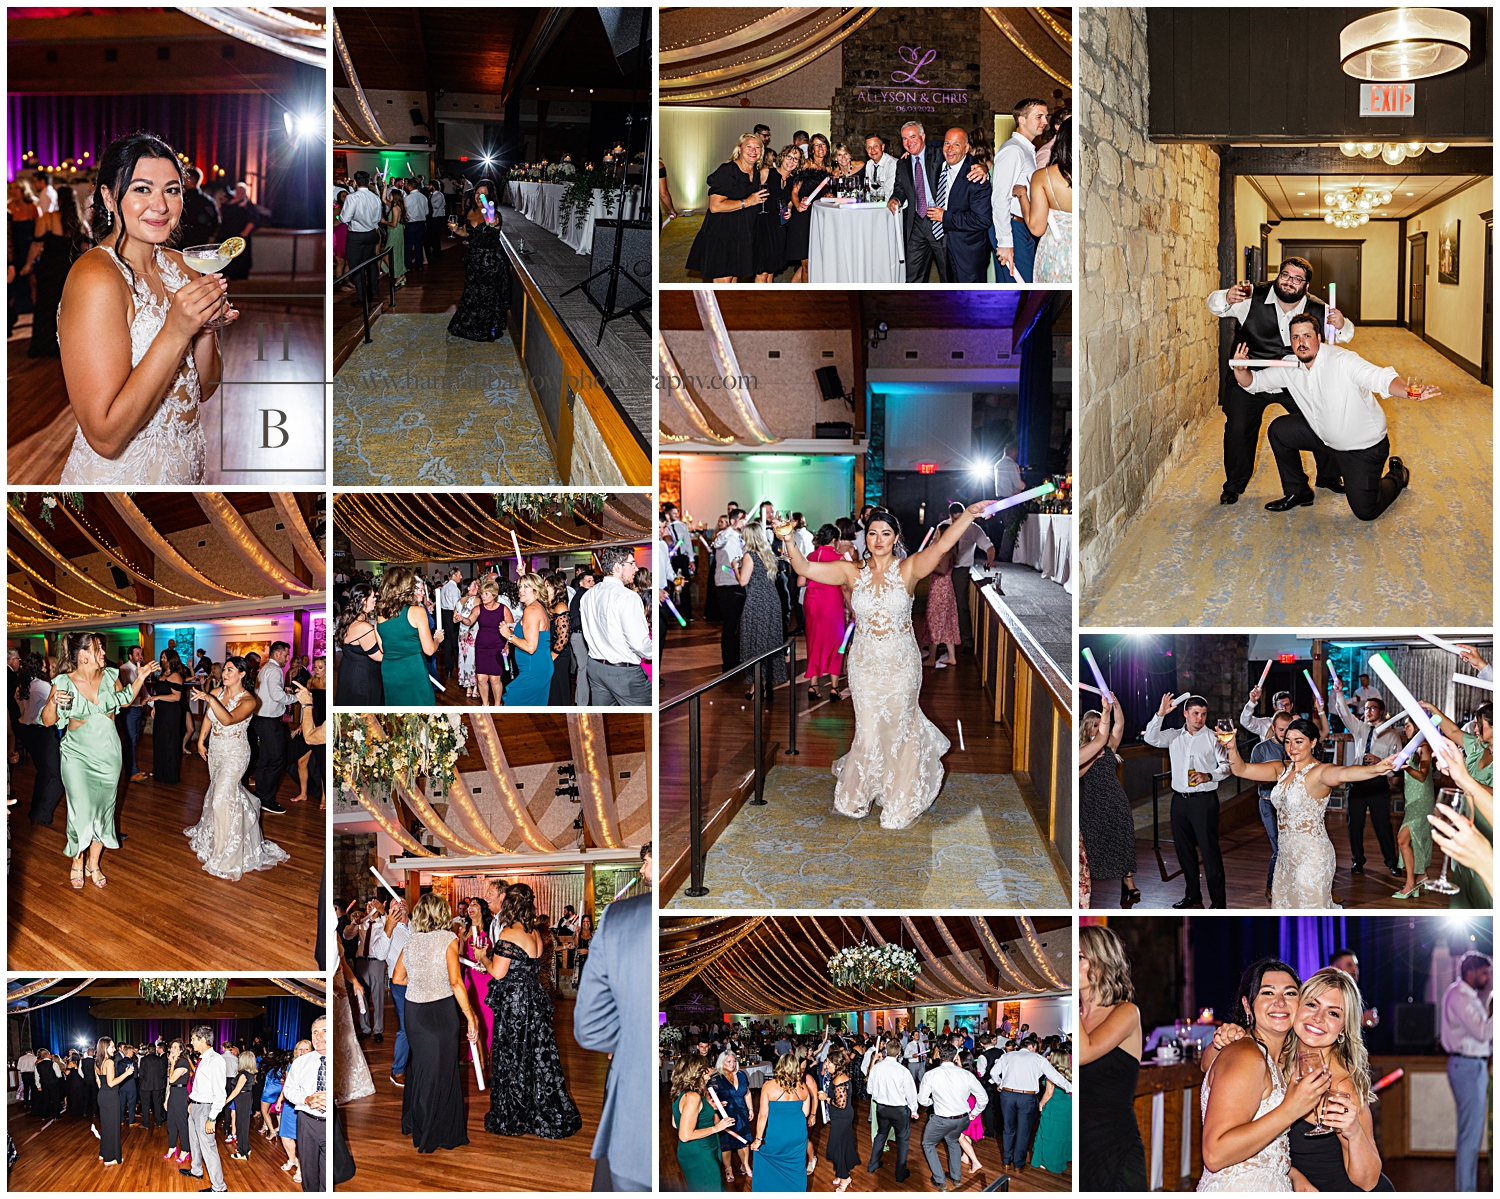 Collage of open dance floor dancing at wedding reception with walls lit with multi colored uplighting.